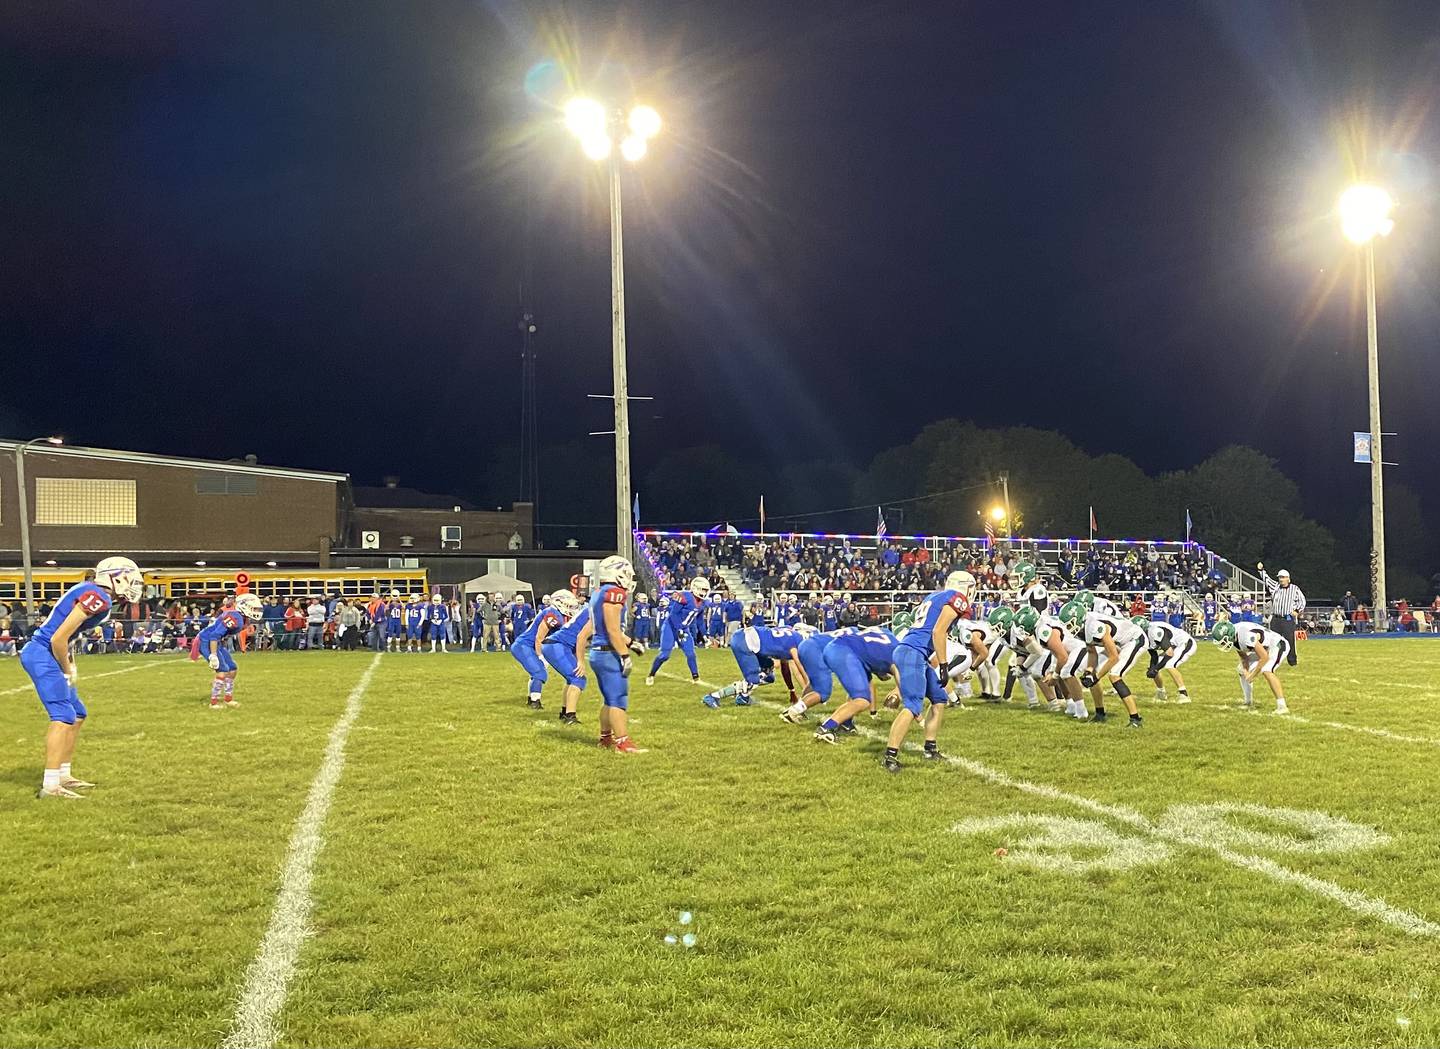 The Seneca Fighting Irish offense (in white) lines up for a snap during one of five touchdown drives against Iroquois West on Friday, Sept. 23, 2022, in Gilman.